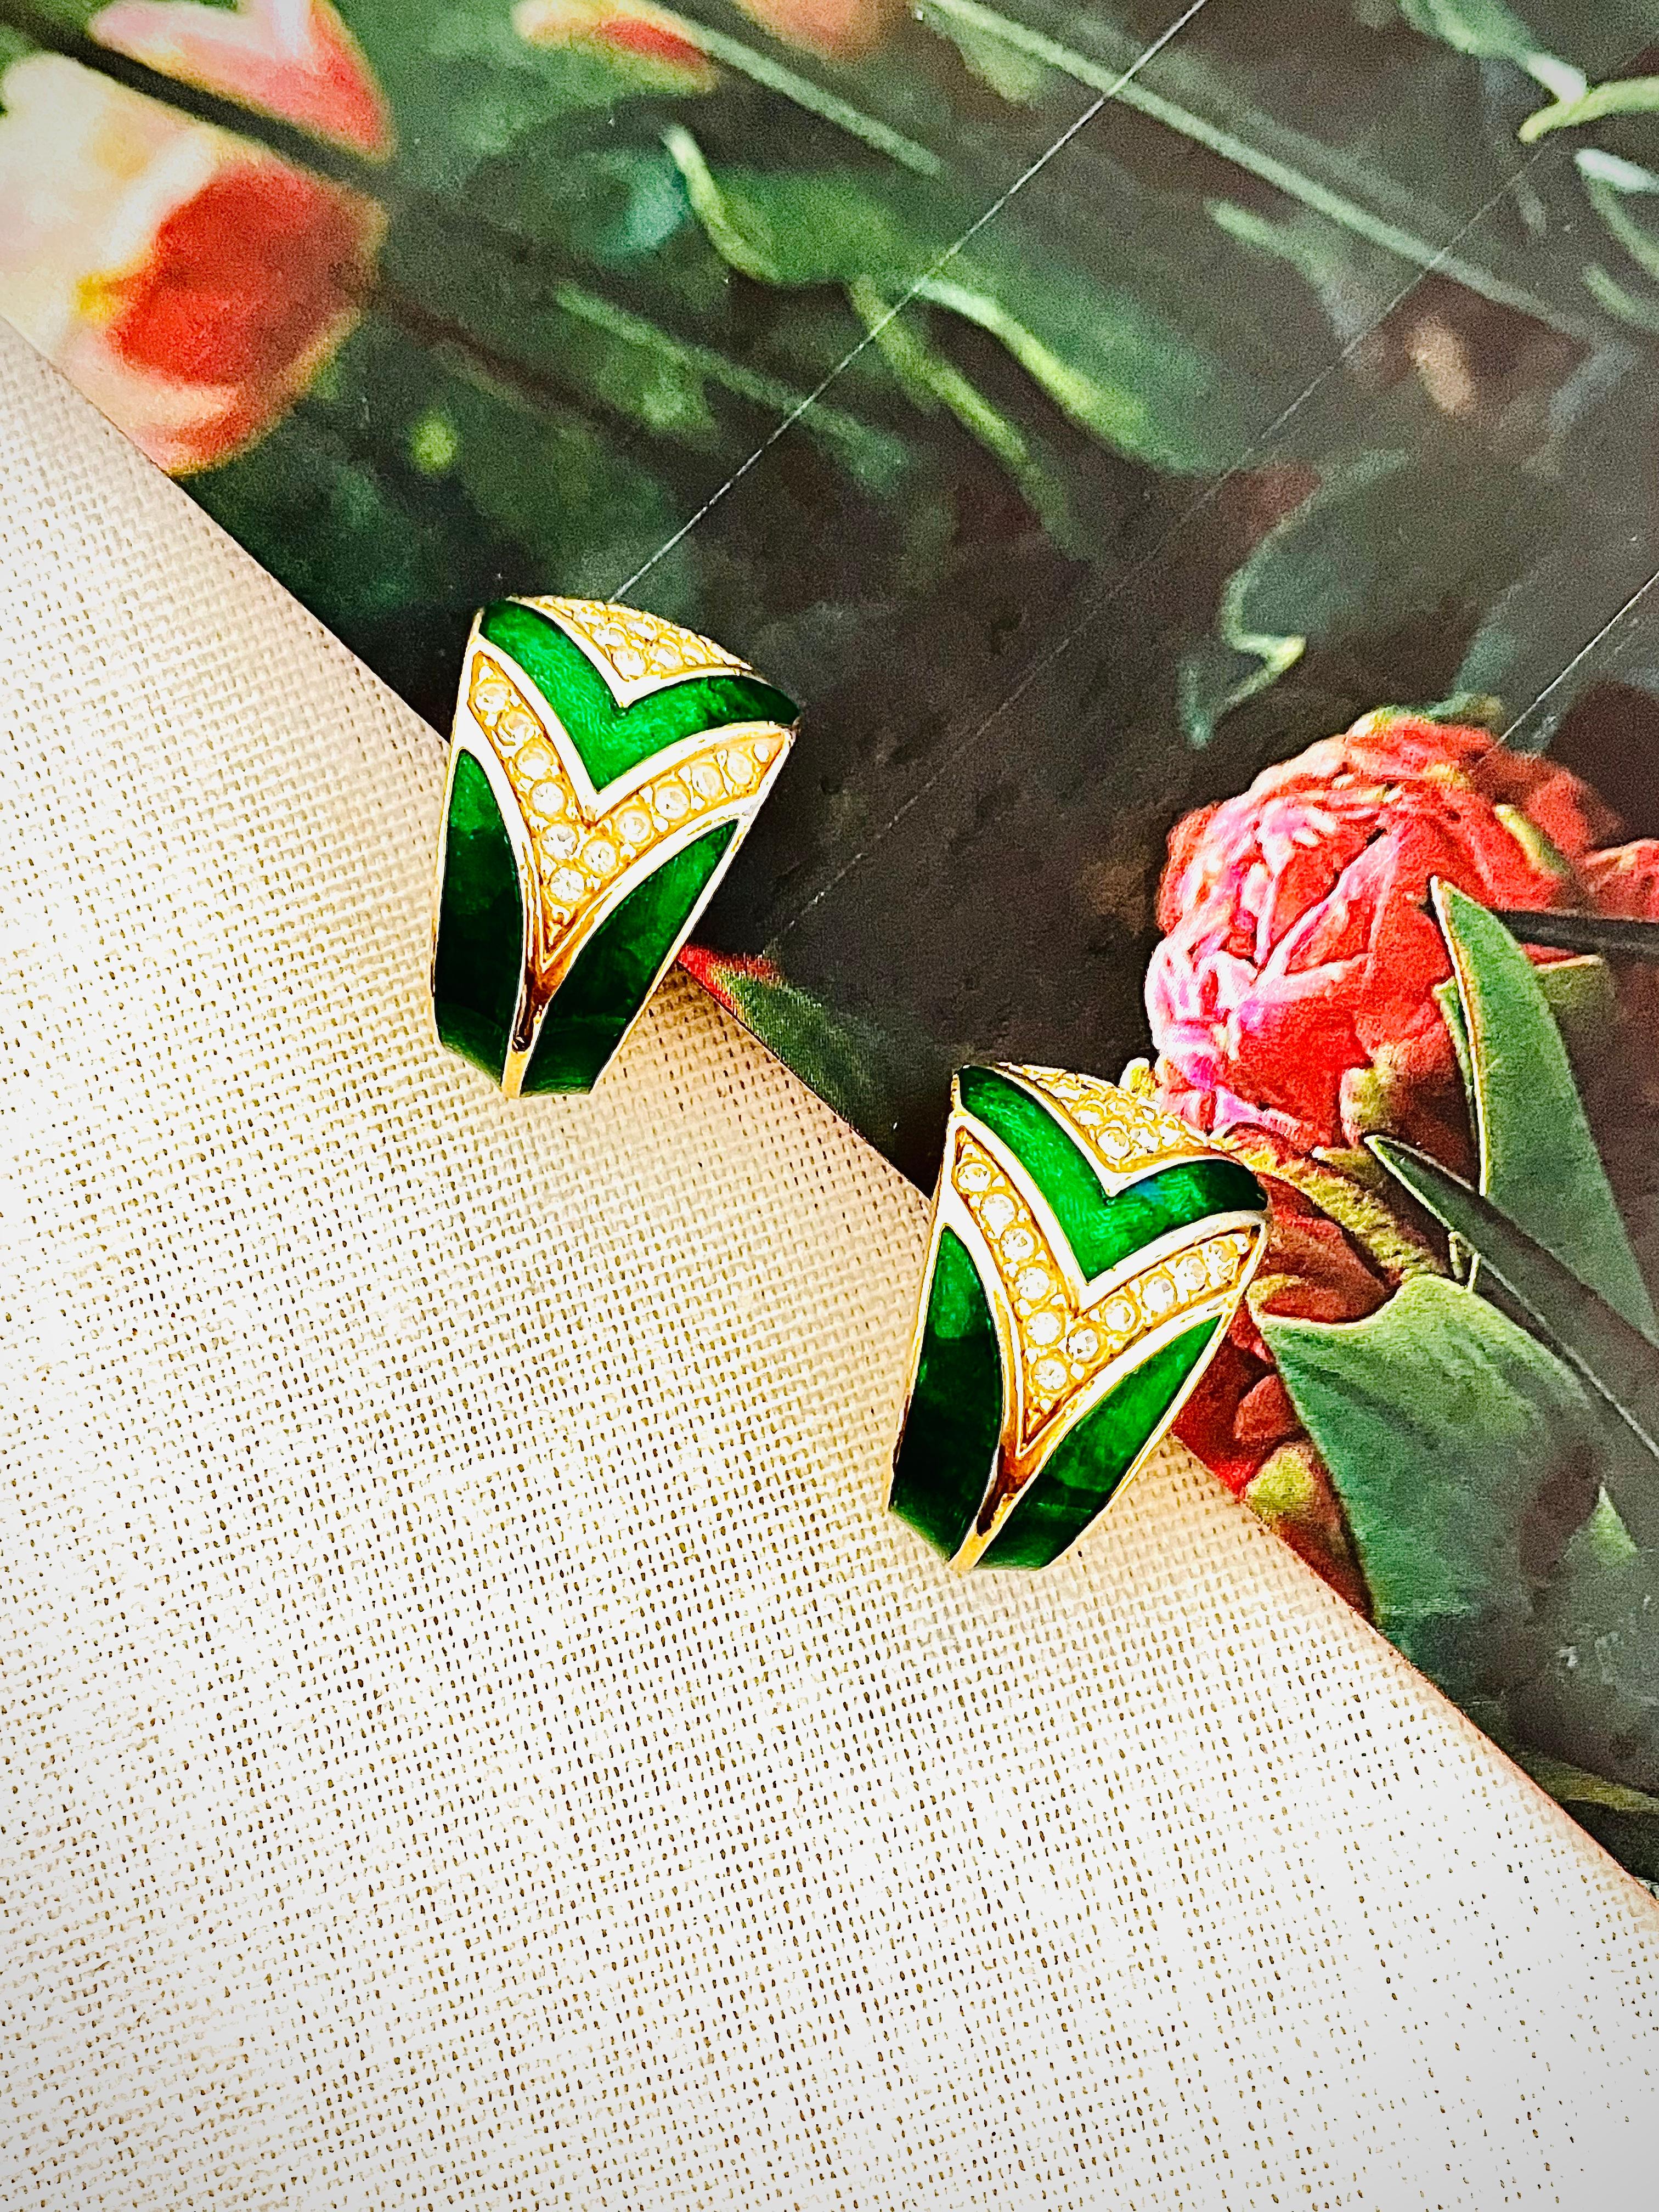 Very excellent condition. Vintage and rare to find. 100% Genuine.

A very beautiful pair of clip on earrings by Chr. DIOR, signed at the back.

Size: 2.5*1.8 cm.

Weight: 14.0 g/each.

_ _ _

Great for everyday wear. Come with velvet pouch and